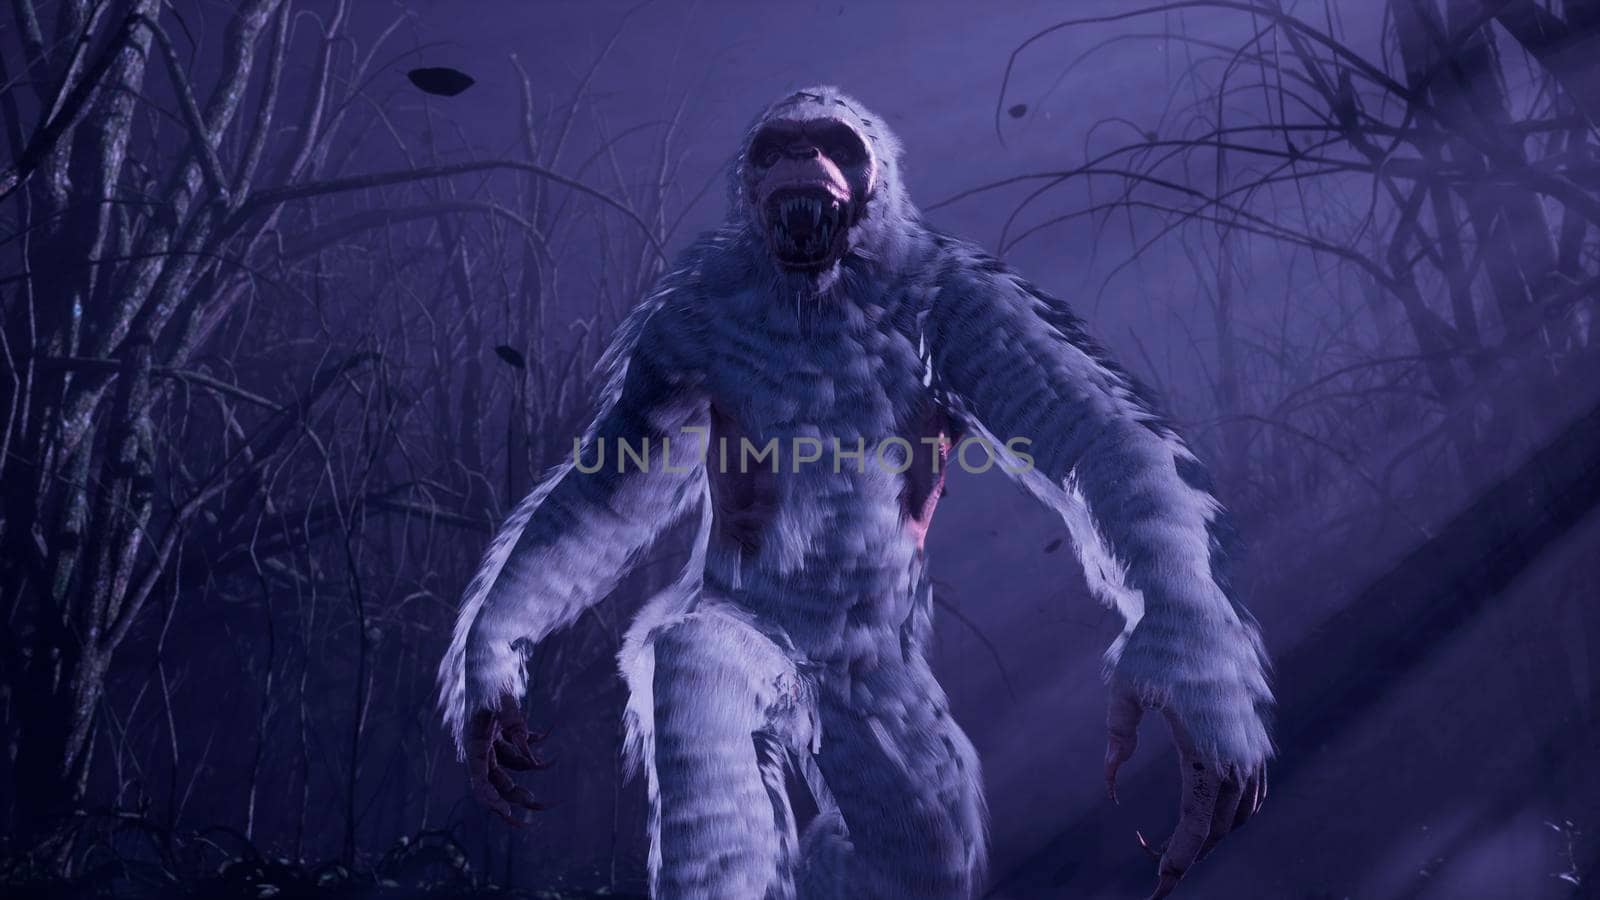 Bigfoot runs through a misty mystical forest at night. The Yeti is walking in a dark scary forest. Illustration for fabulous, fiction or fantasy backgrounds.